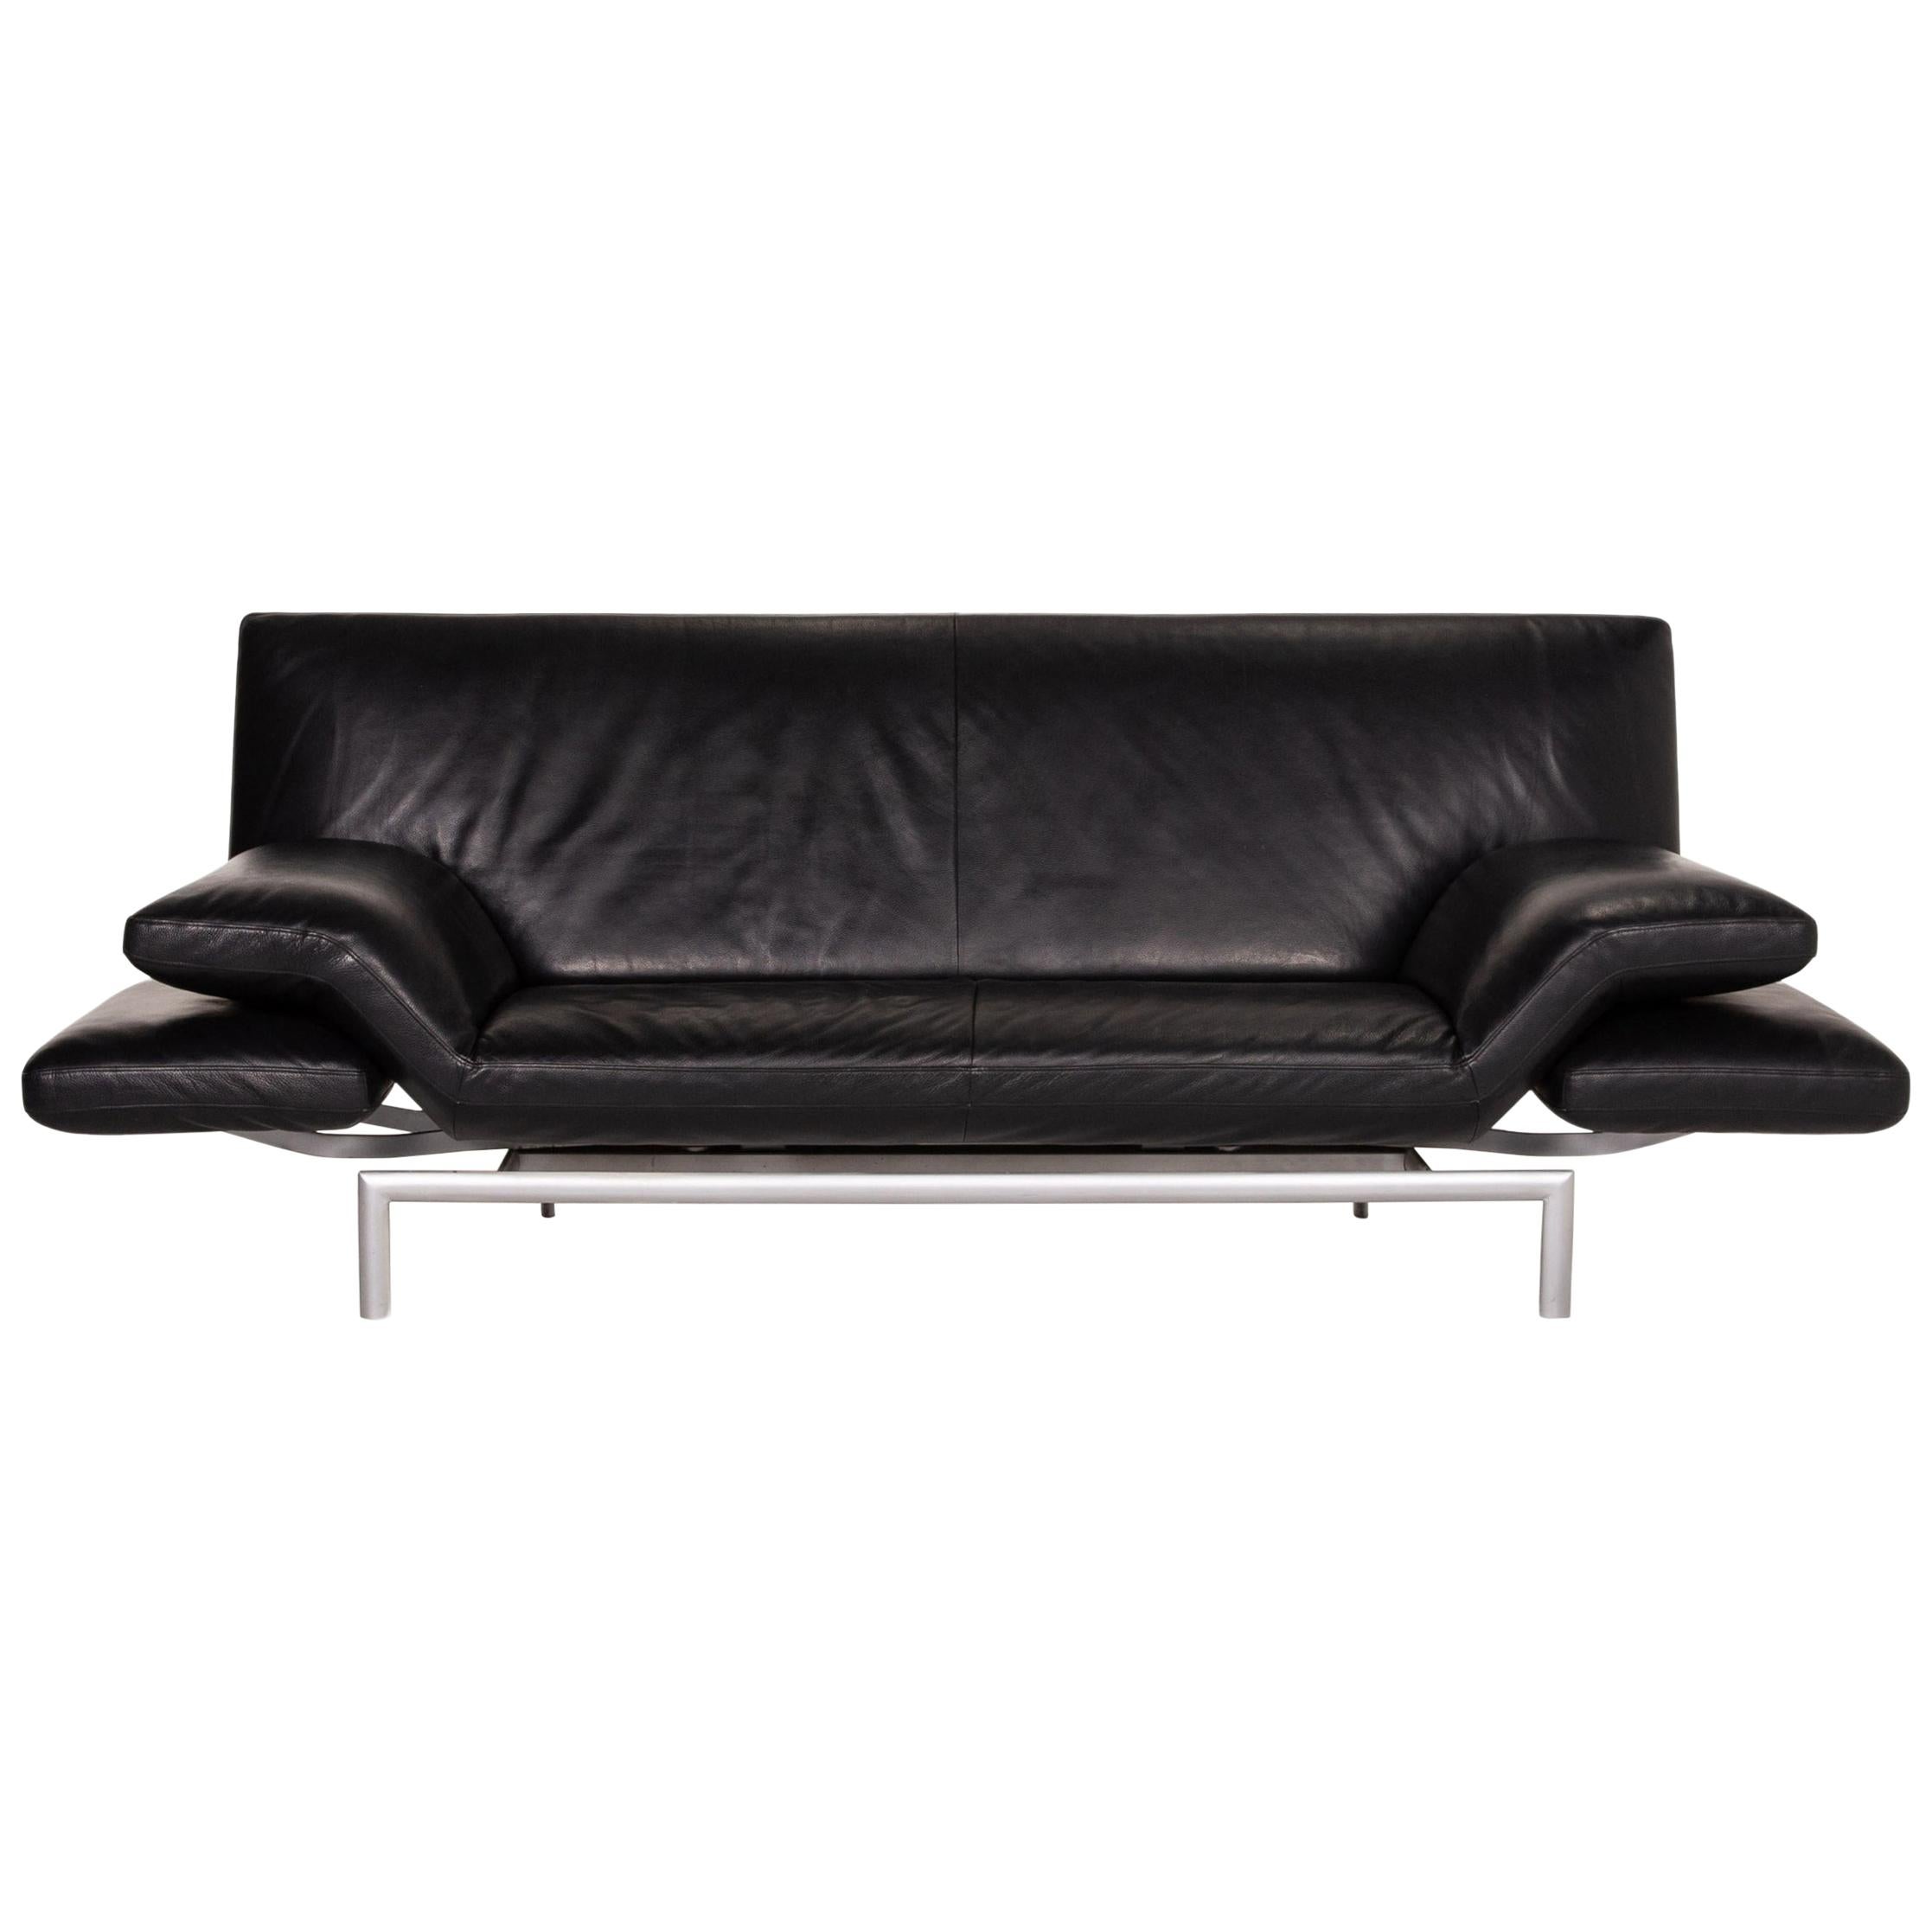 Designo Flyer Leather Sofa Black Two-Seat Function Couch